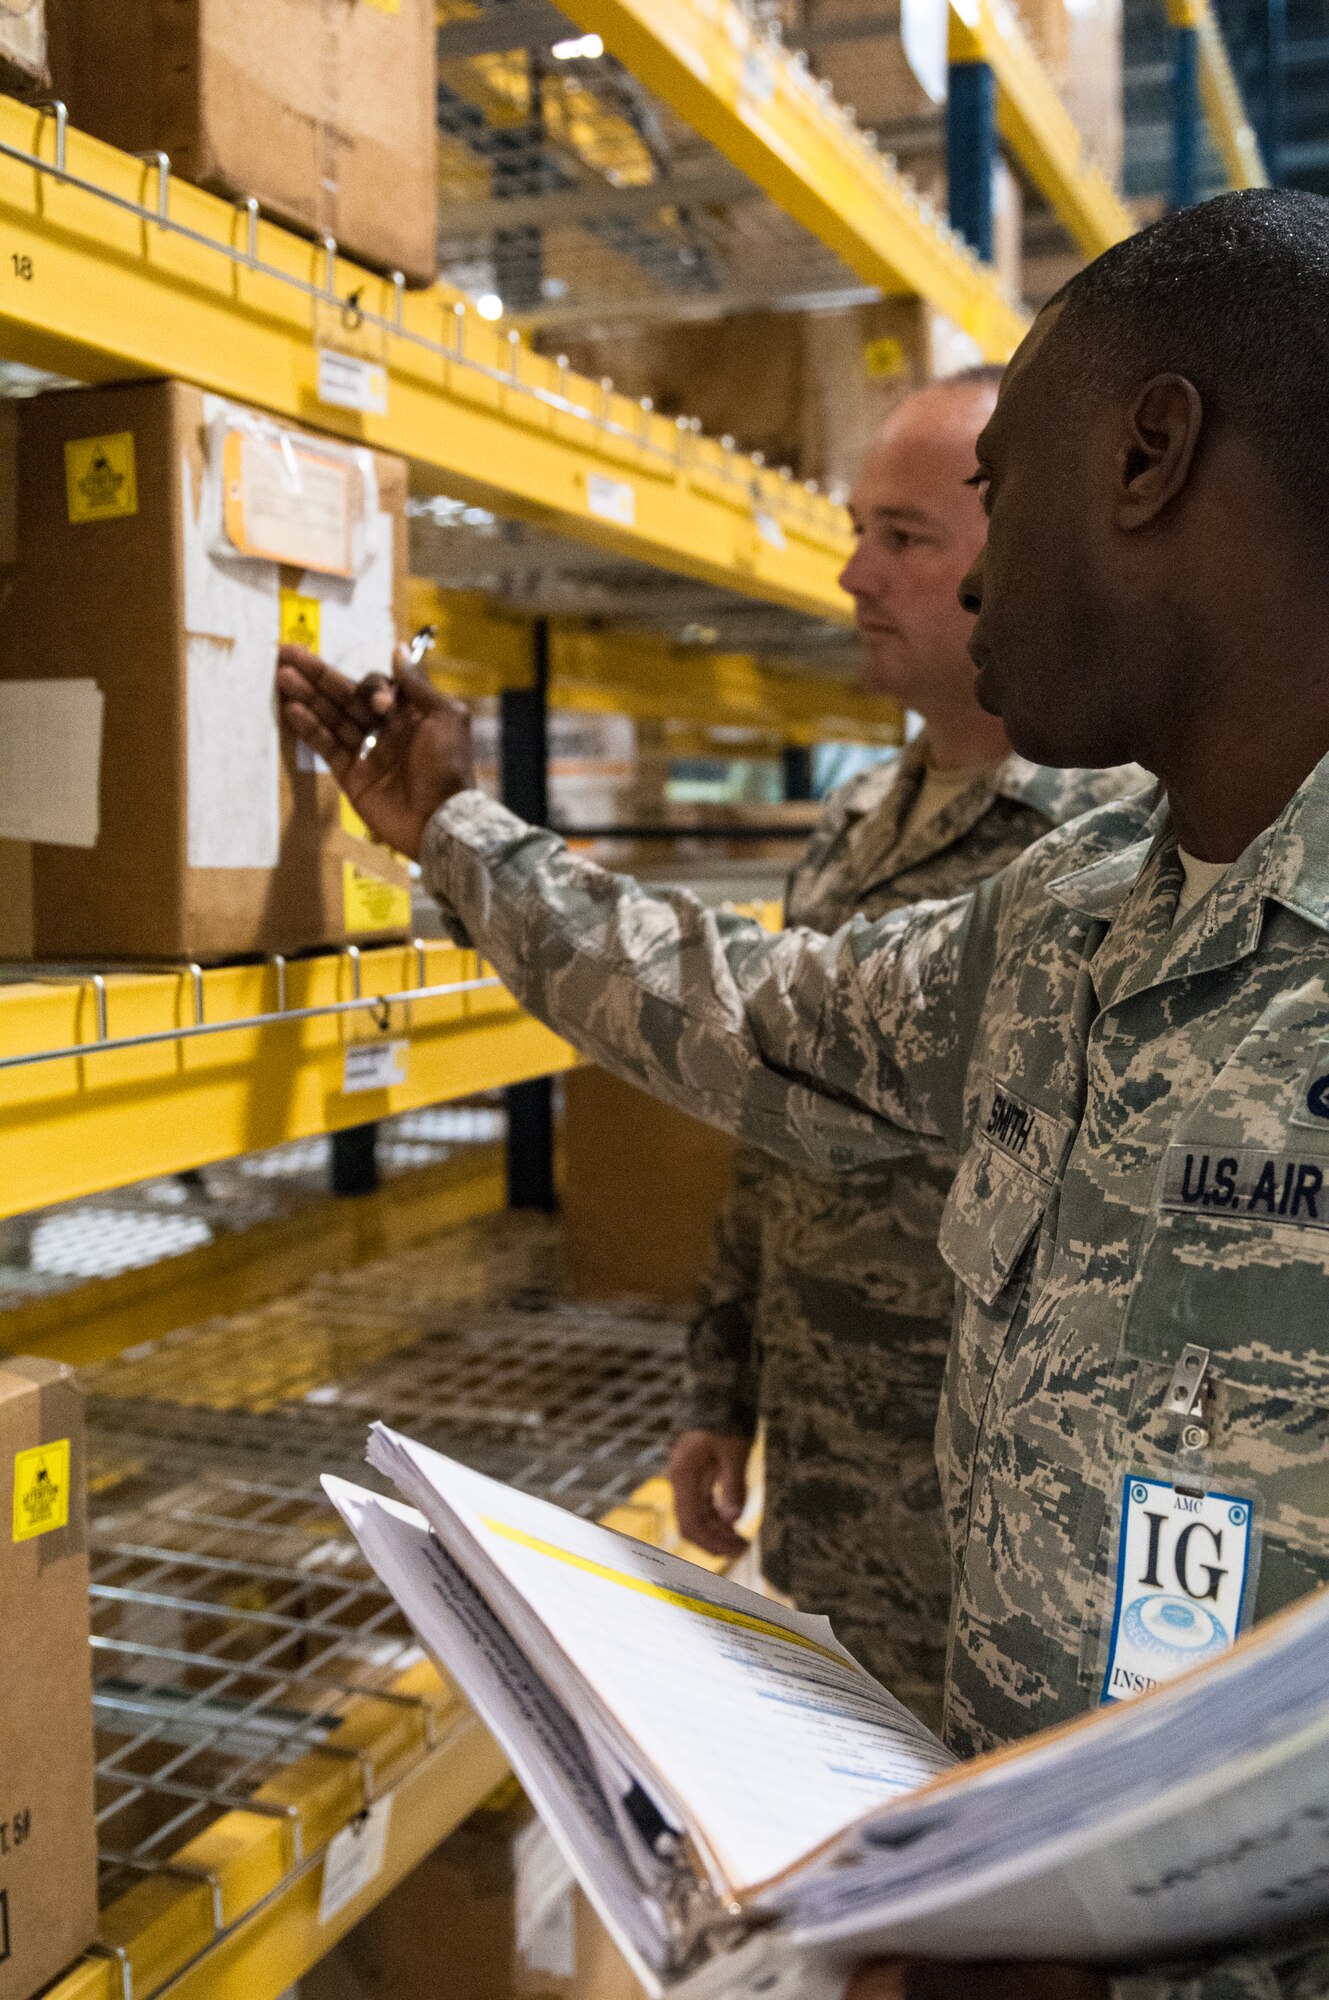 Master Sgt. Carlos Smith, an inspector from Air Mobility Command, discusses inventory labeling procedures with Master Sgt. Andrew Bush of the Kentucky Air National Guard’s 123rd Logistics Readiness Squadron during an evaluation of the 123rd Airlift Wing supply warehouse in Louisville, Ky., May 19, 2013. The wing underwent a multi-disciplinary Consolidated Unit Inspection from May 15 to 22. (U.S. Air National Guard photo by Senior Airman Vicky Spesard)